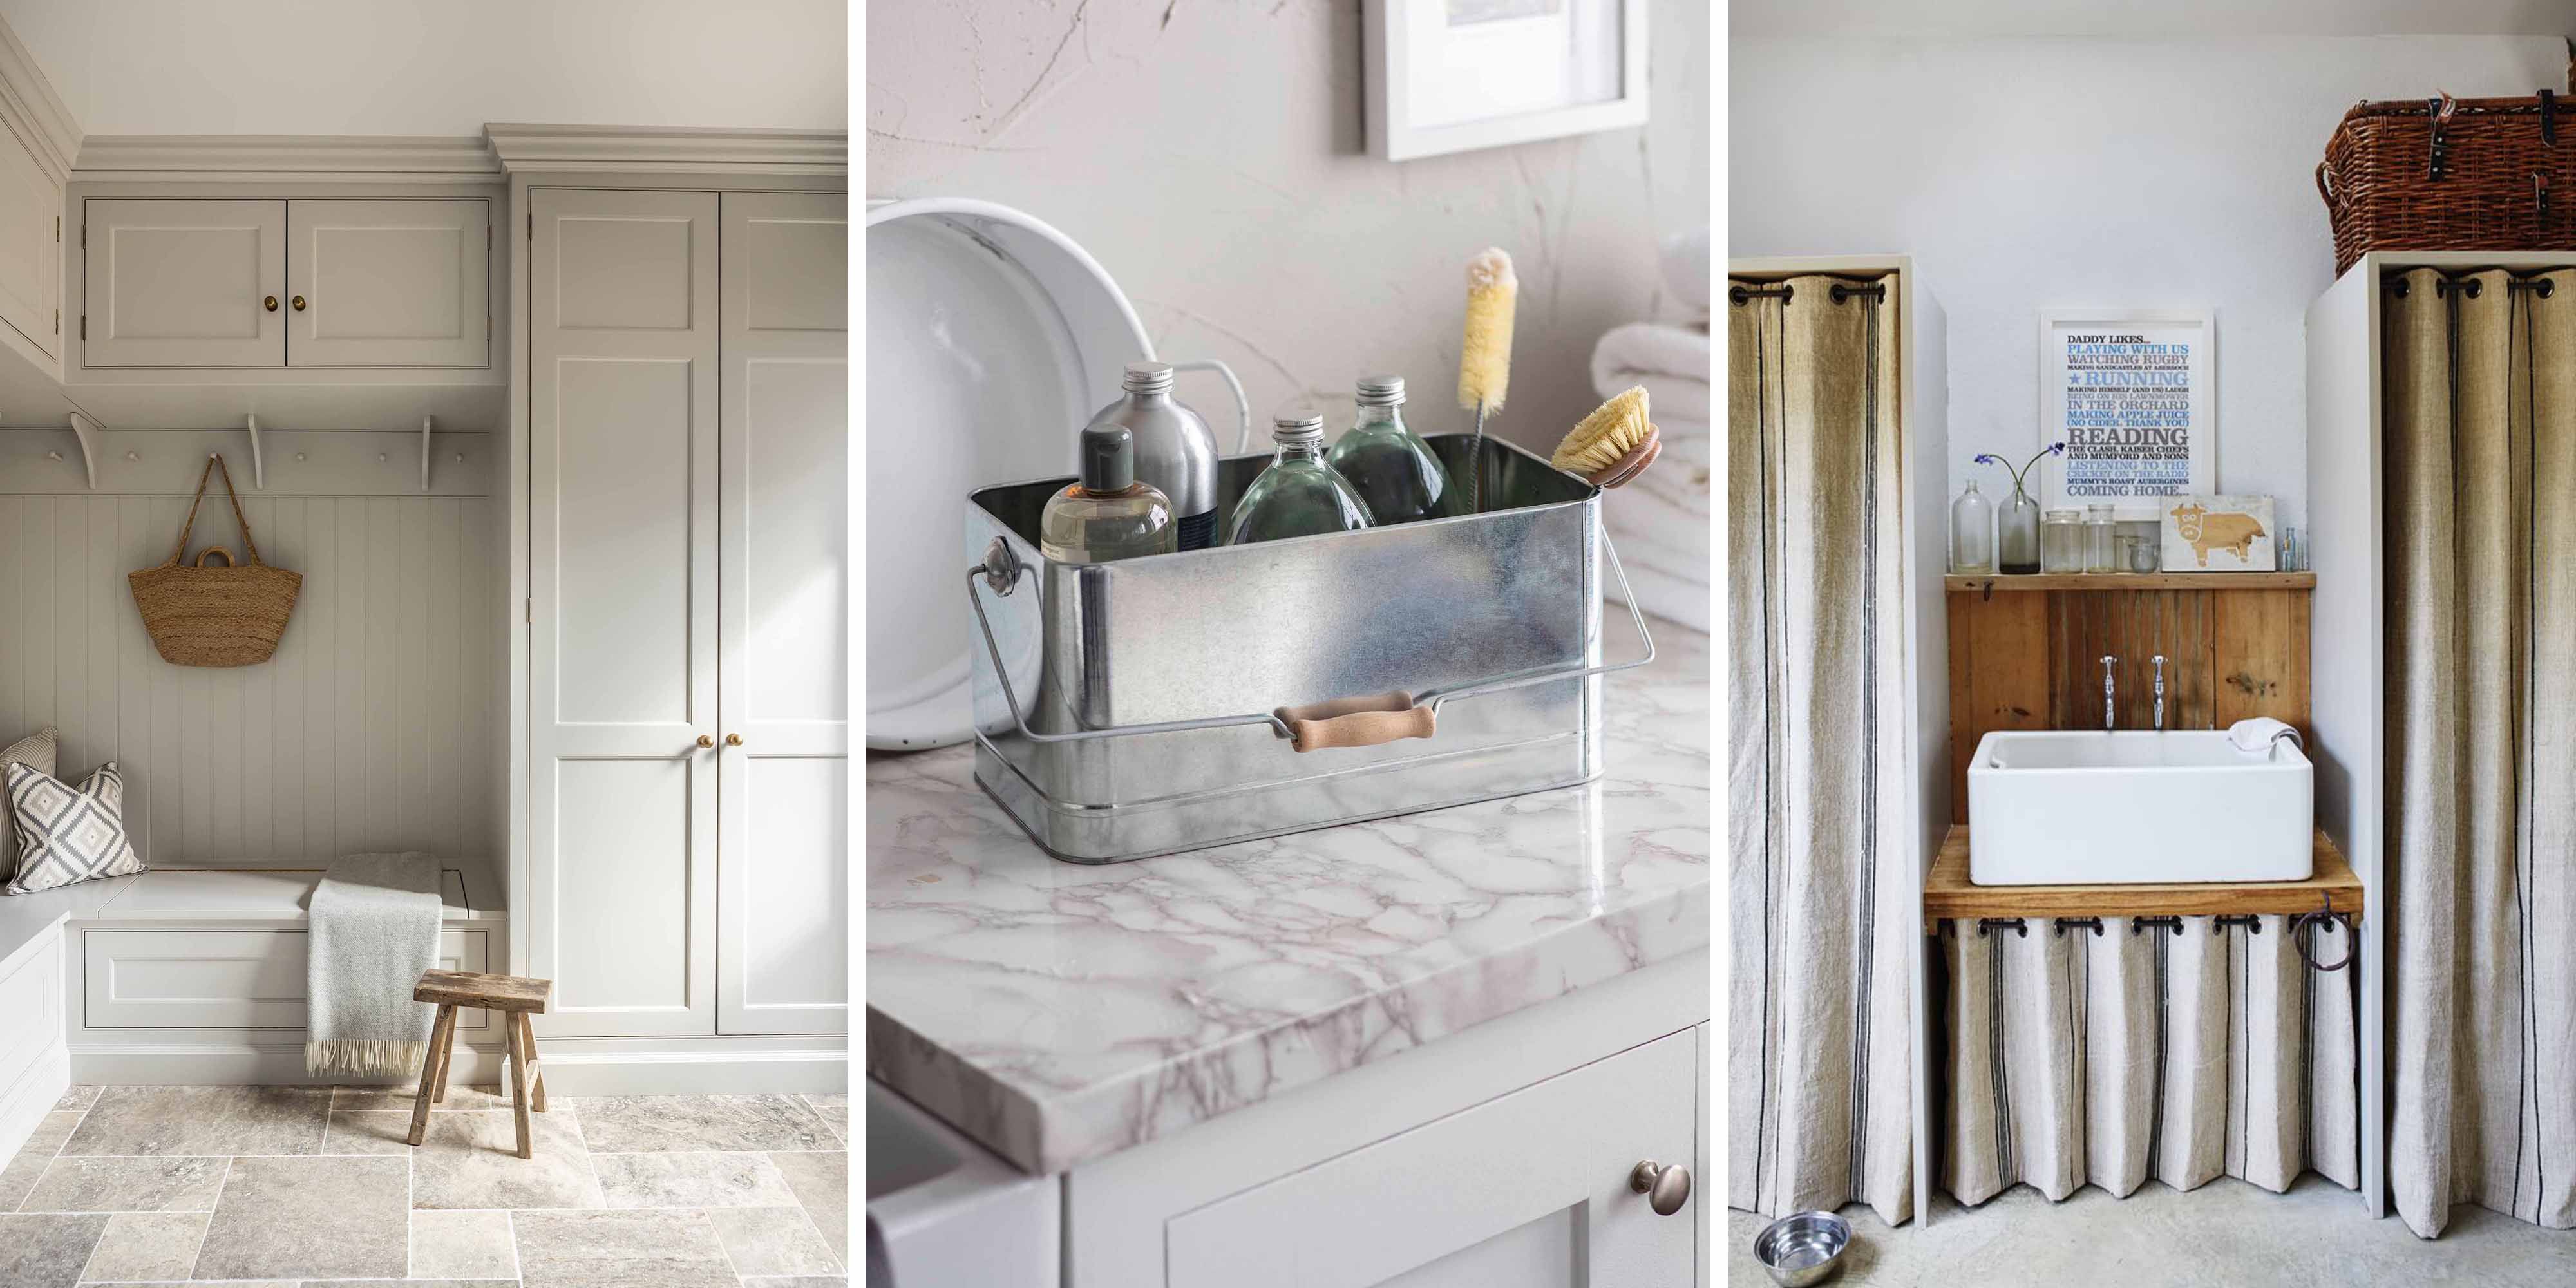 7 utility room ideas combining practicality and style